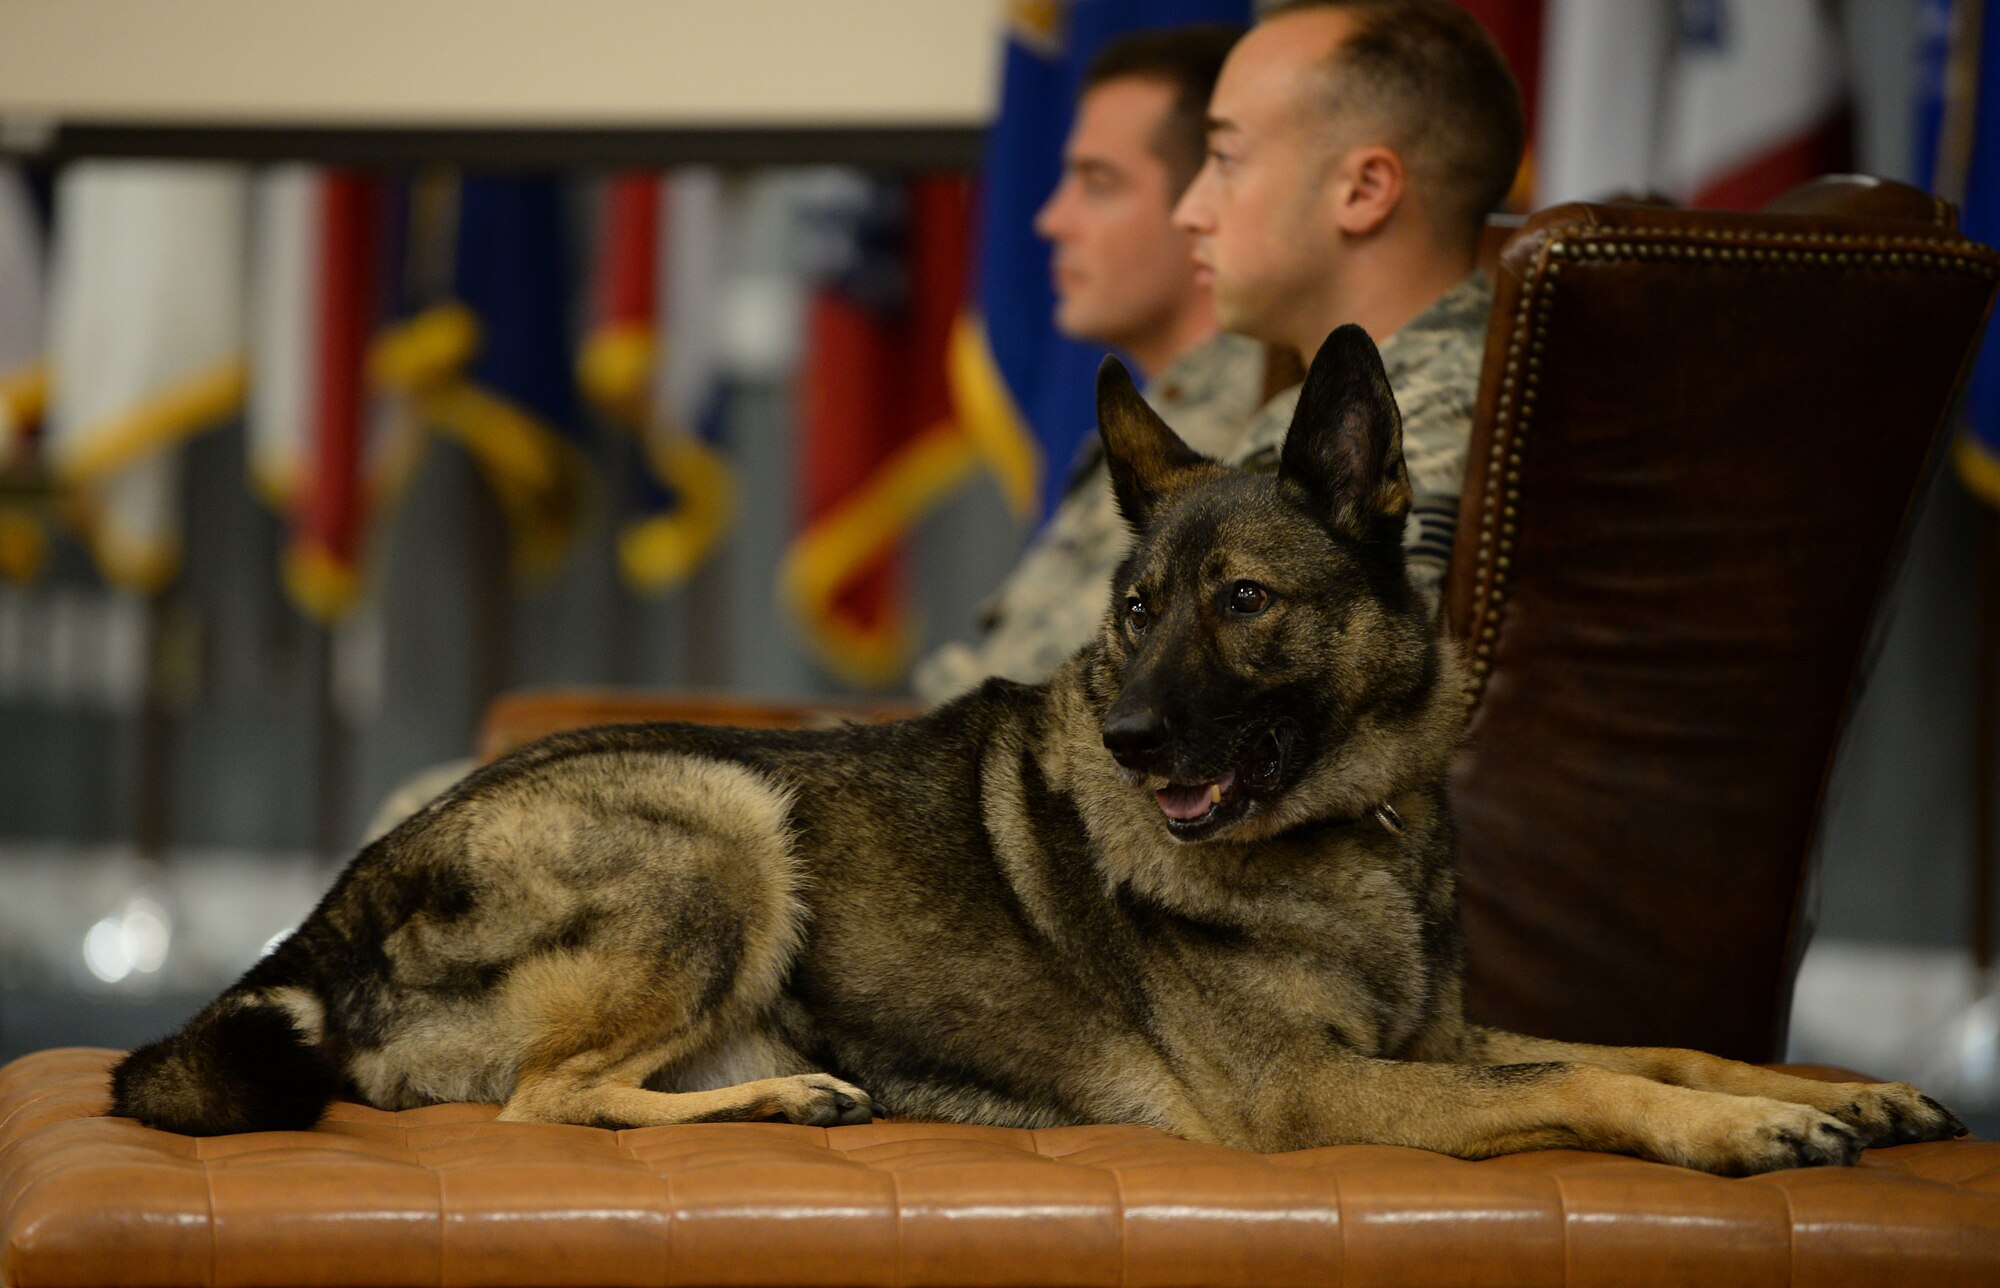 Military Working Dog Cherry, 14th Security Forces Squadron, scans the audience during her retirement ceremony Aug. 24, 2018, on Columbus Air Force Base, Mississippi. Cherry served for more than 10 years in the Air Force. (U.S. Air Force photo by Airman Hannah Bean)